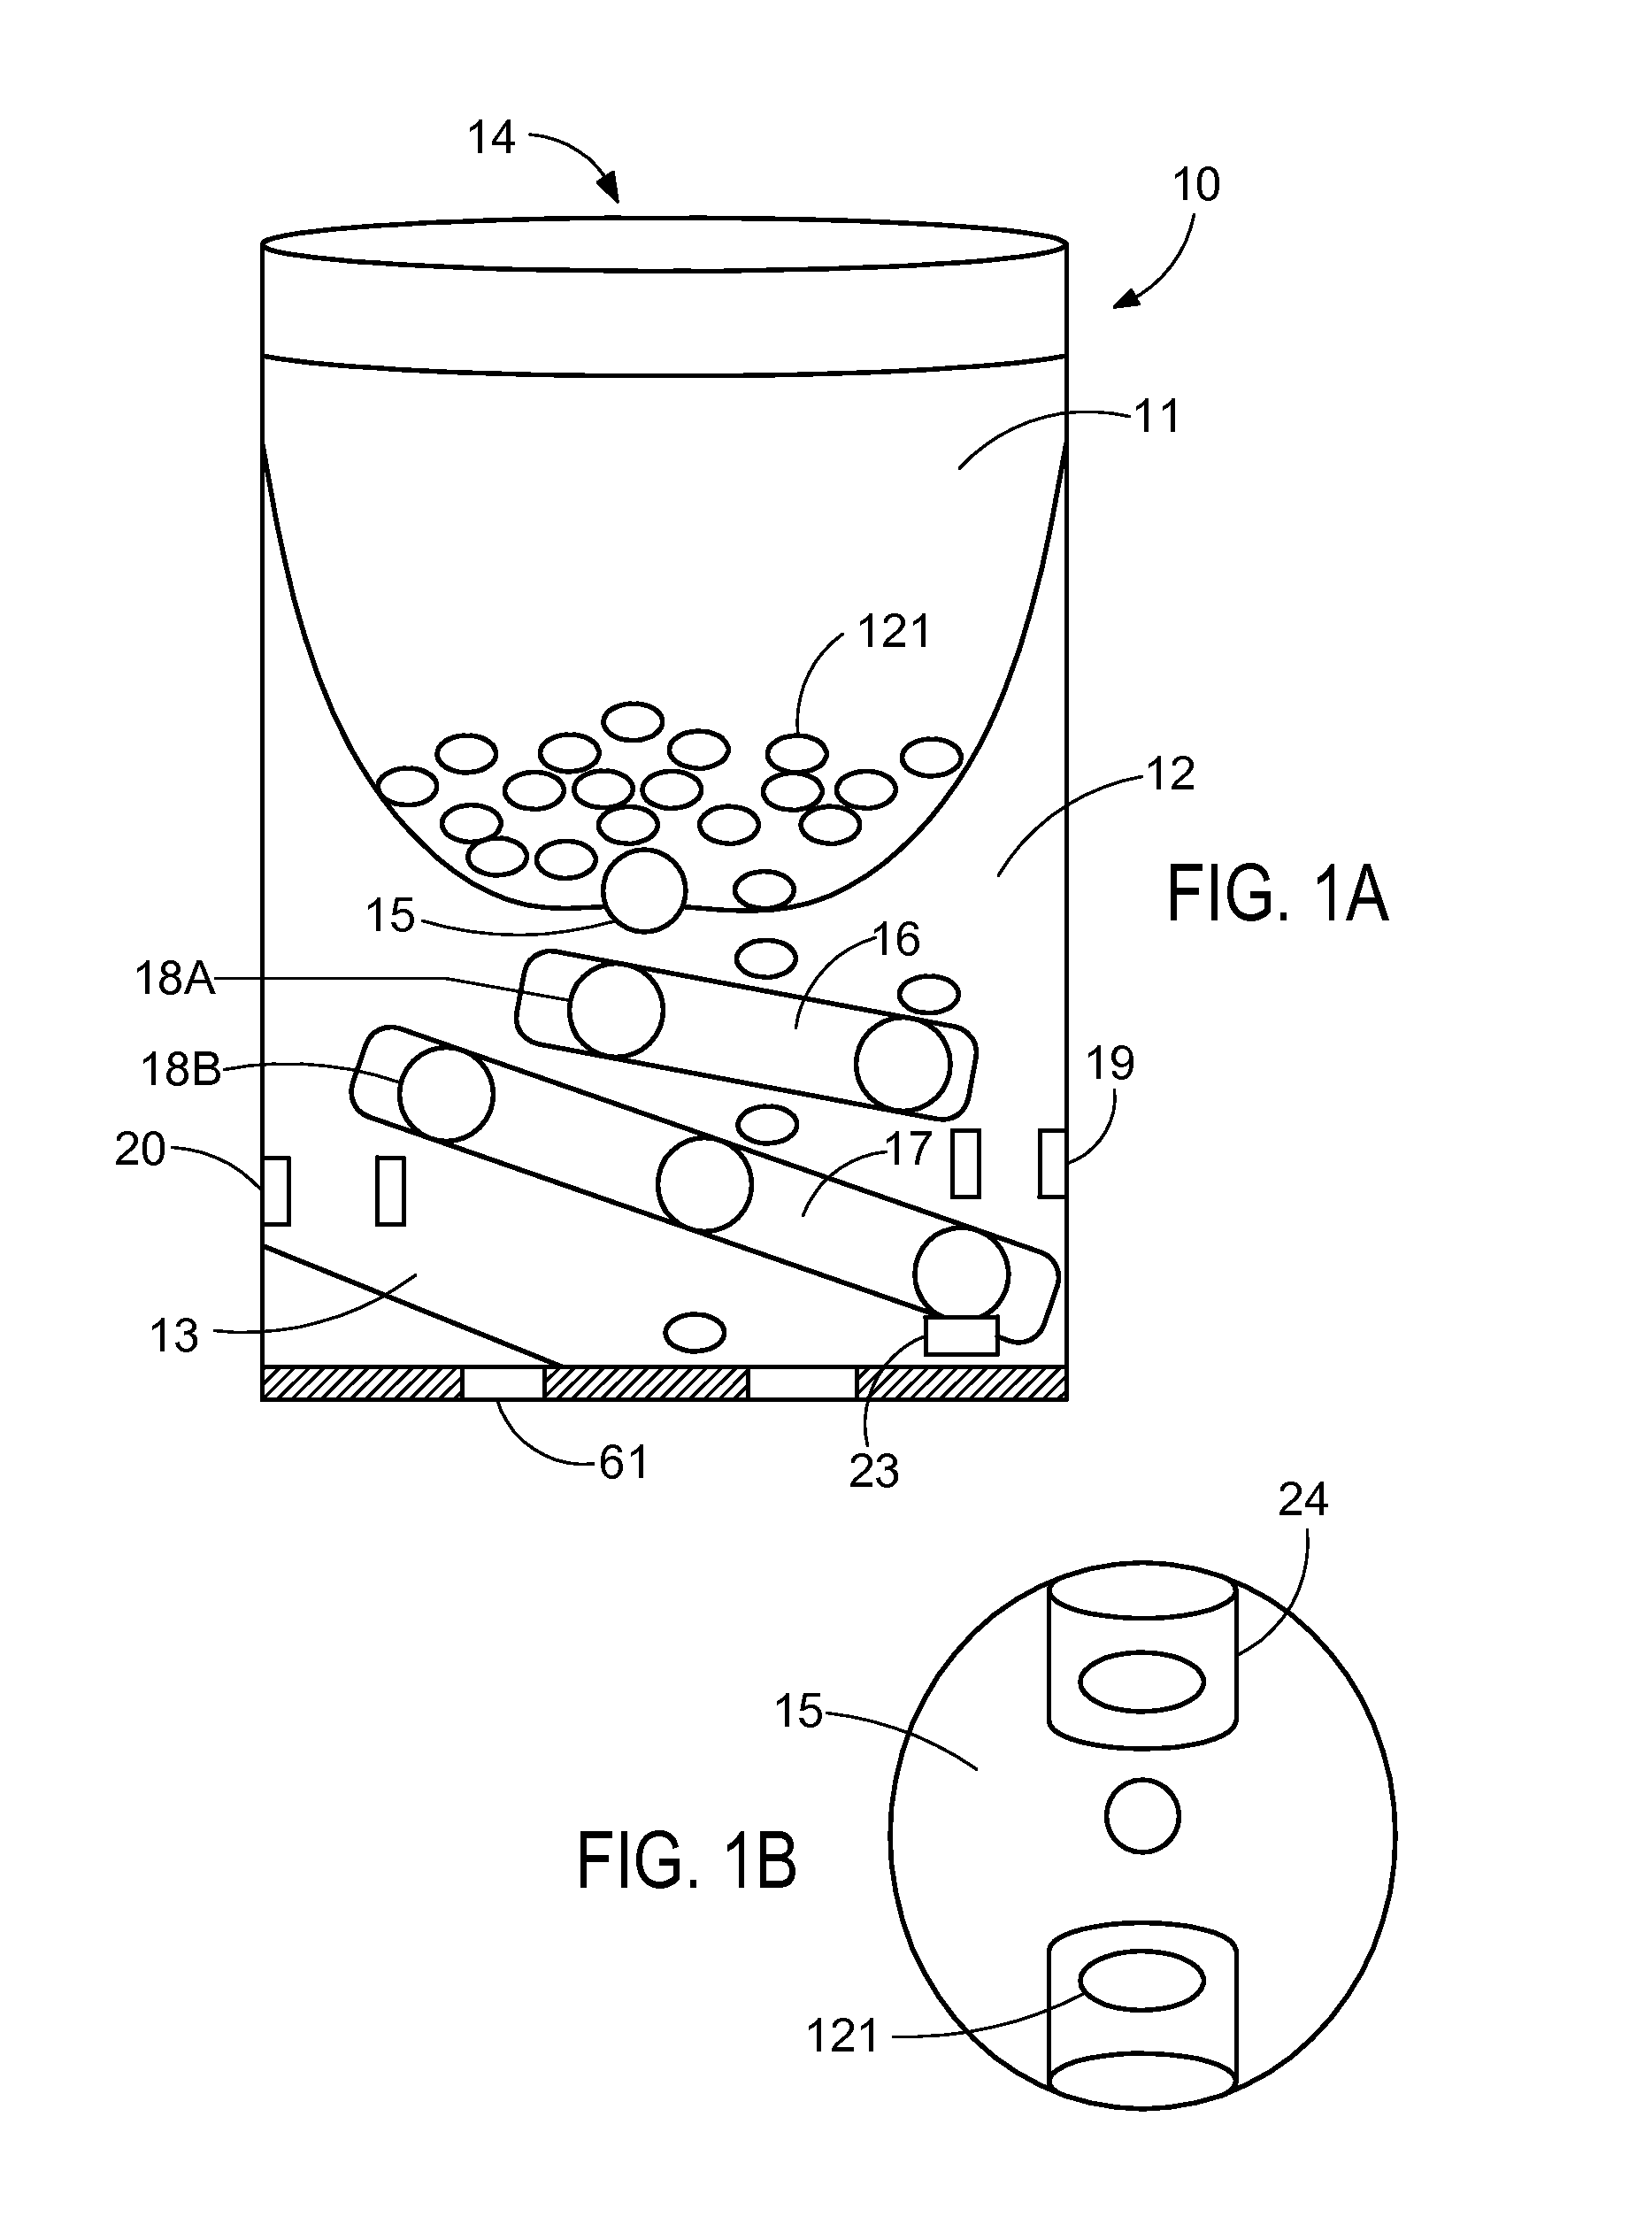 System and apparatus for displaying drug interactions on drug storage containers